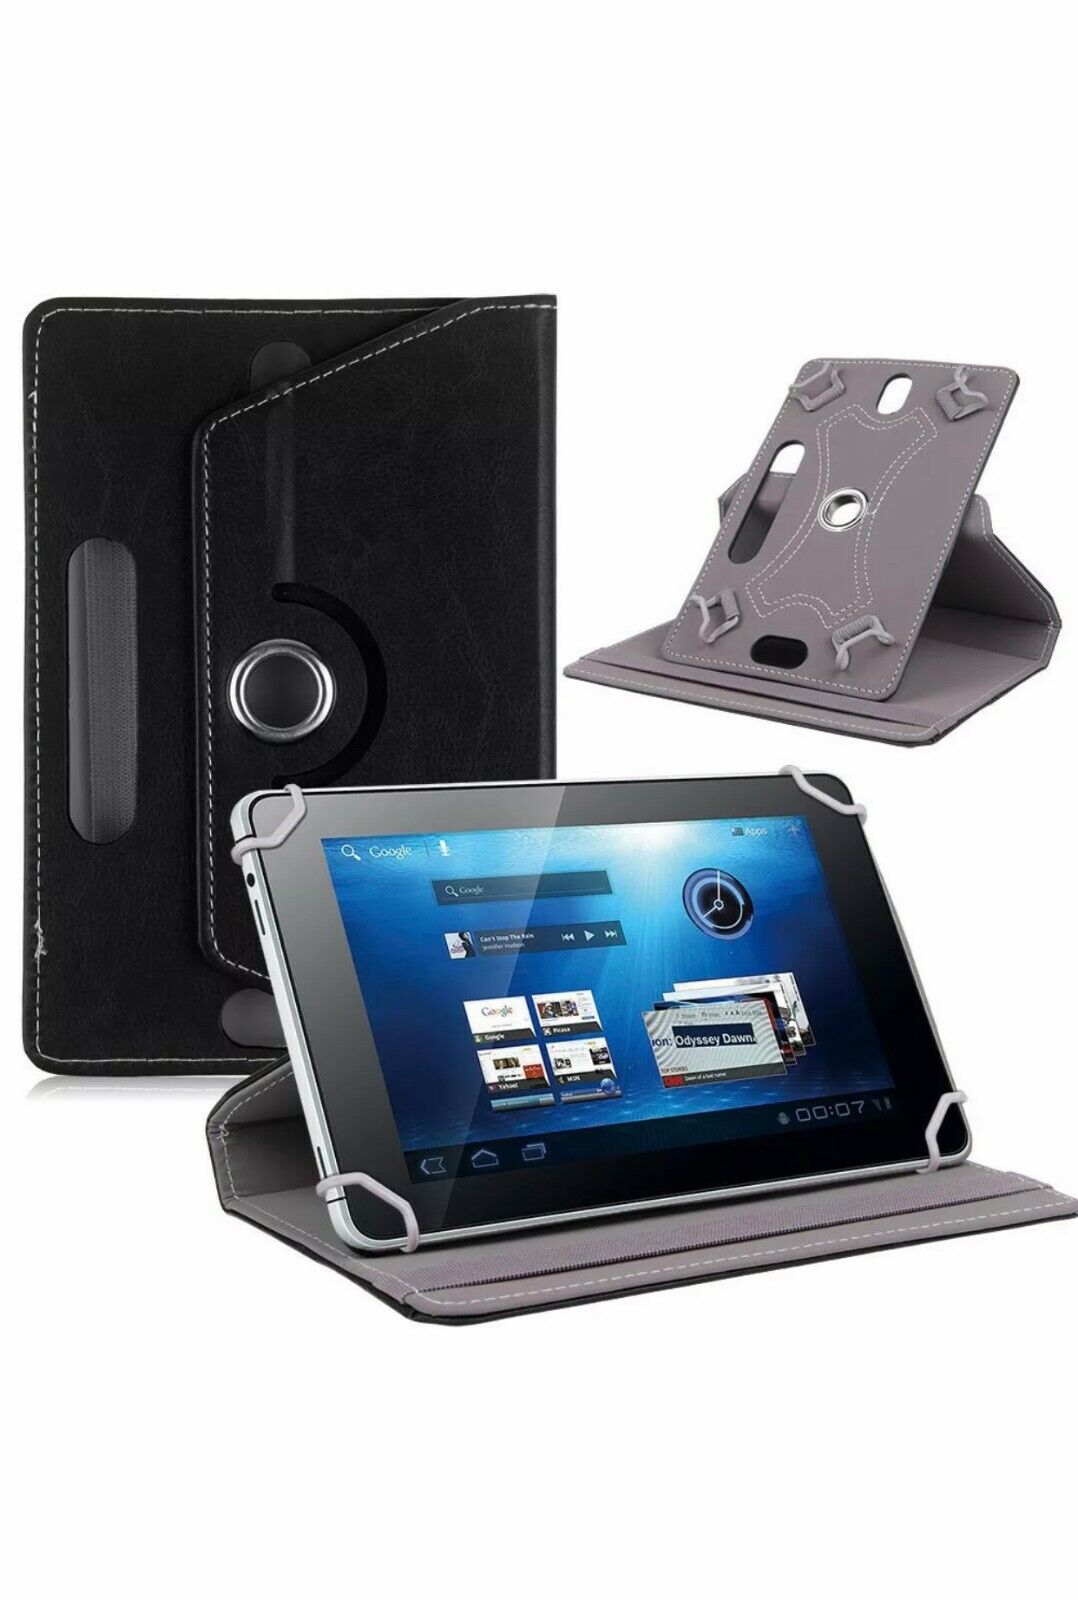 Hot 360° Folio Leather Case Cover Stand For Android Tablet PC 7\